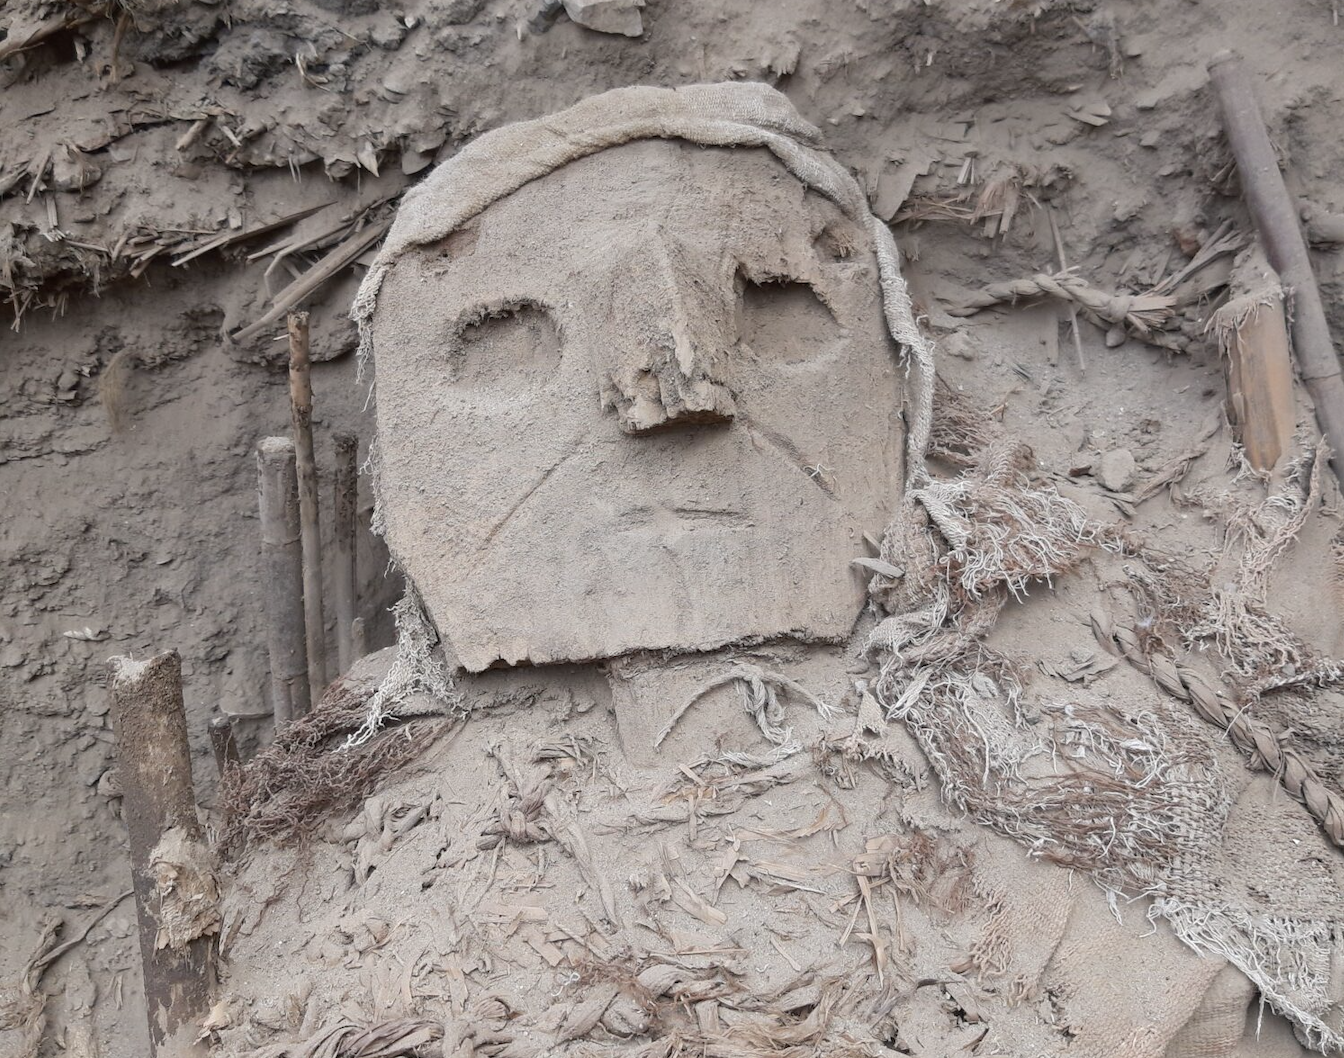 Carved wood mask on the so-called “false head” of a burial tomb, Pachacámac, Peru